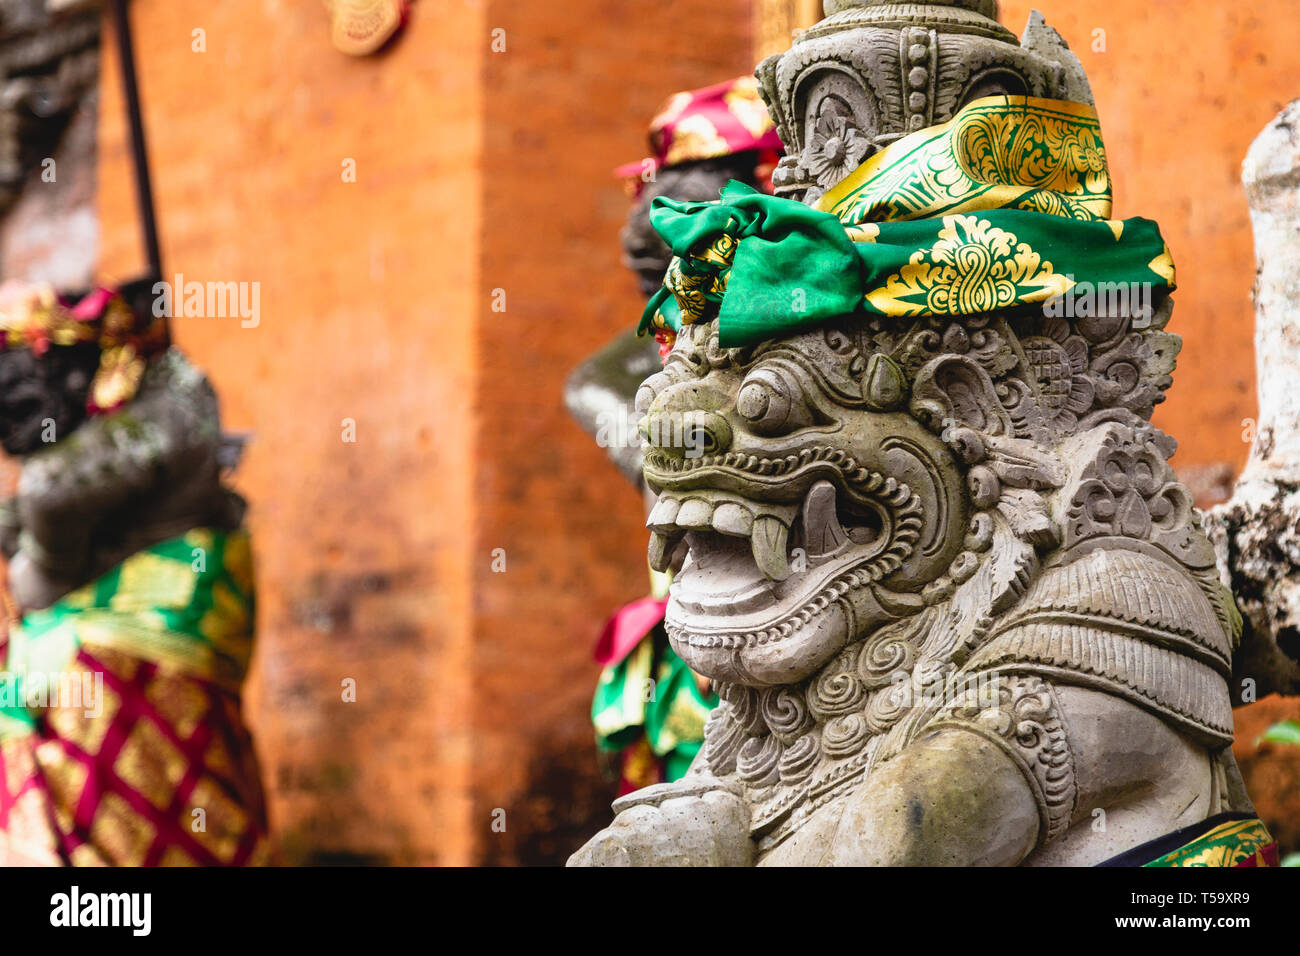 Decorated Statue at a Hindu Temple in Bali, Indonesia Stock Photo